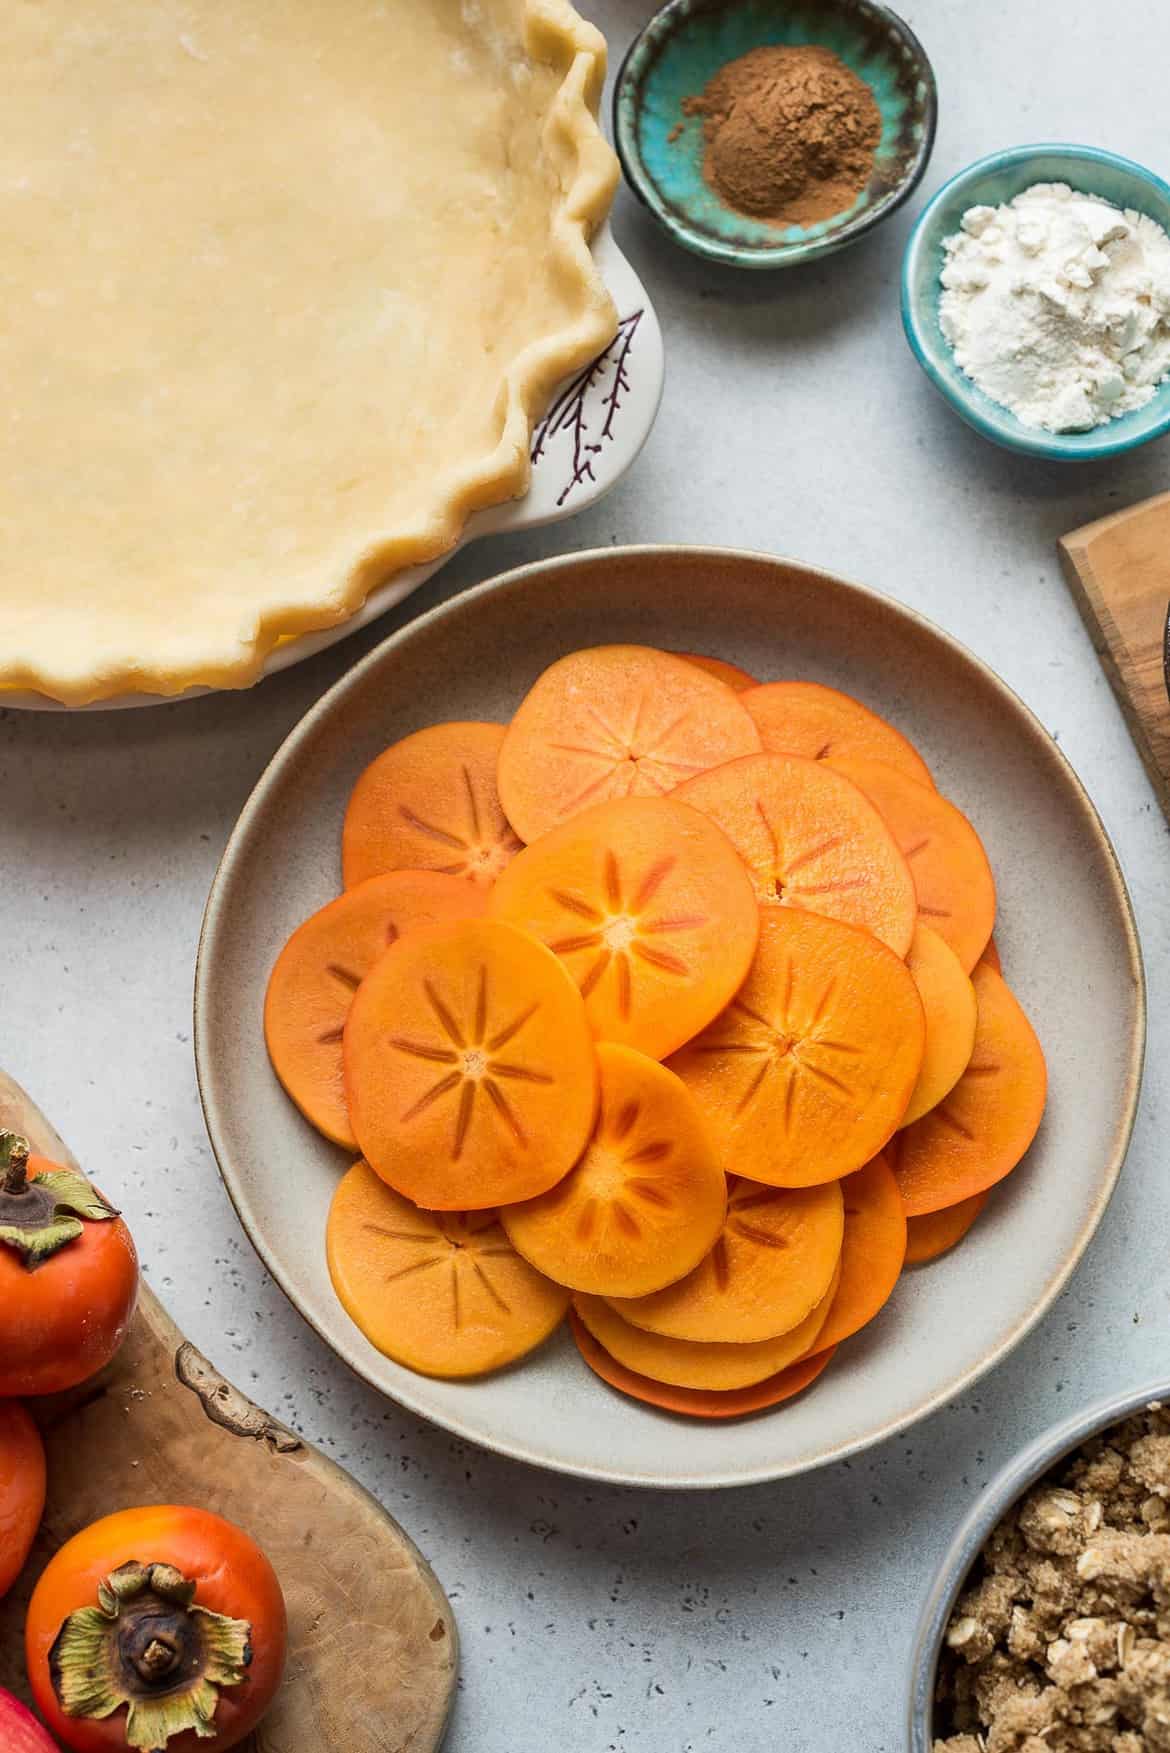 Slices of fresh persimmons on a wooden surface.